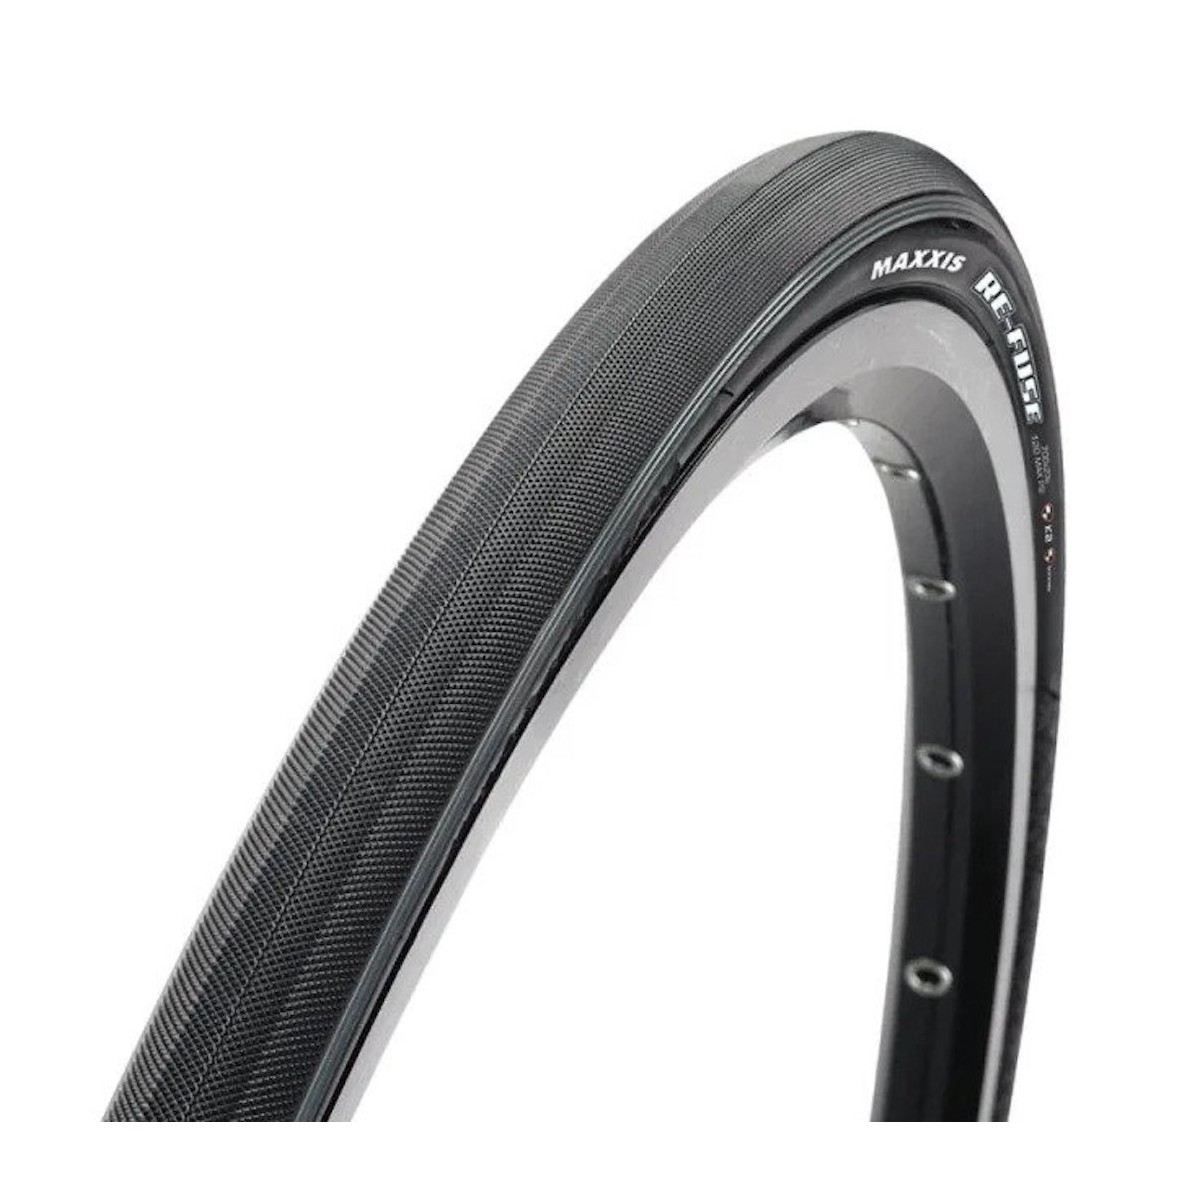 MAXXIS RE-FUSE 700 X 28C tyre